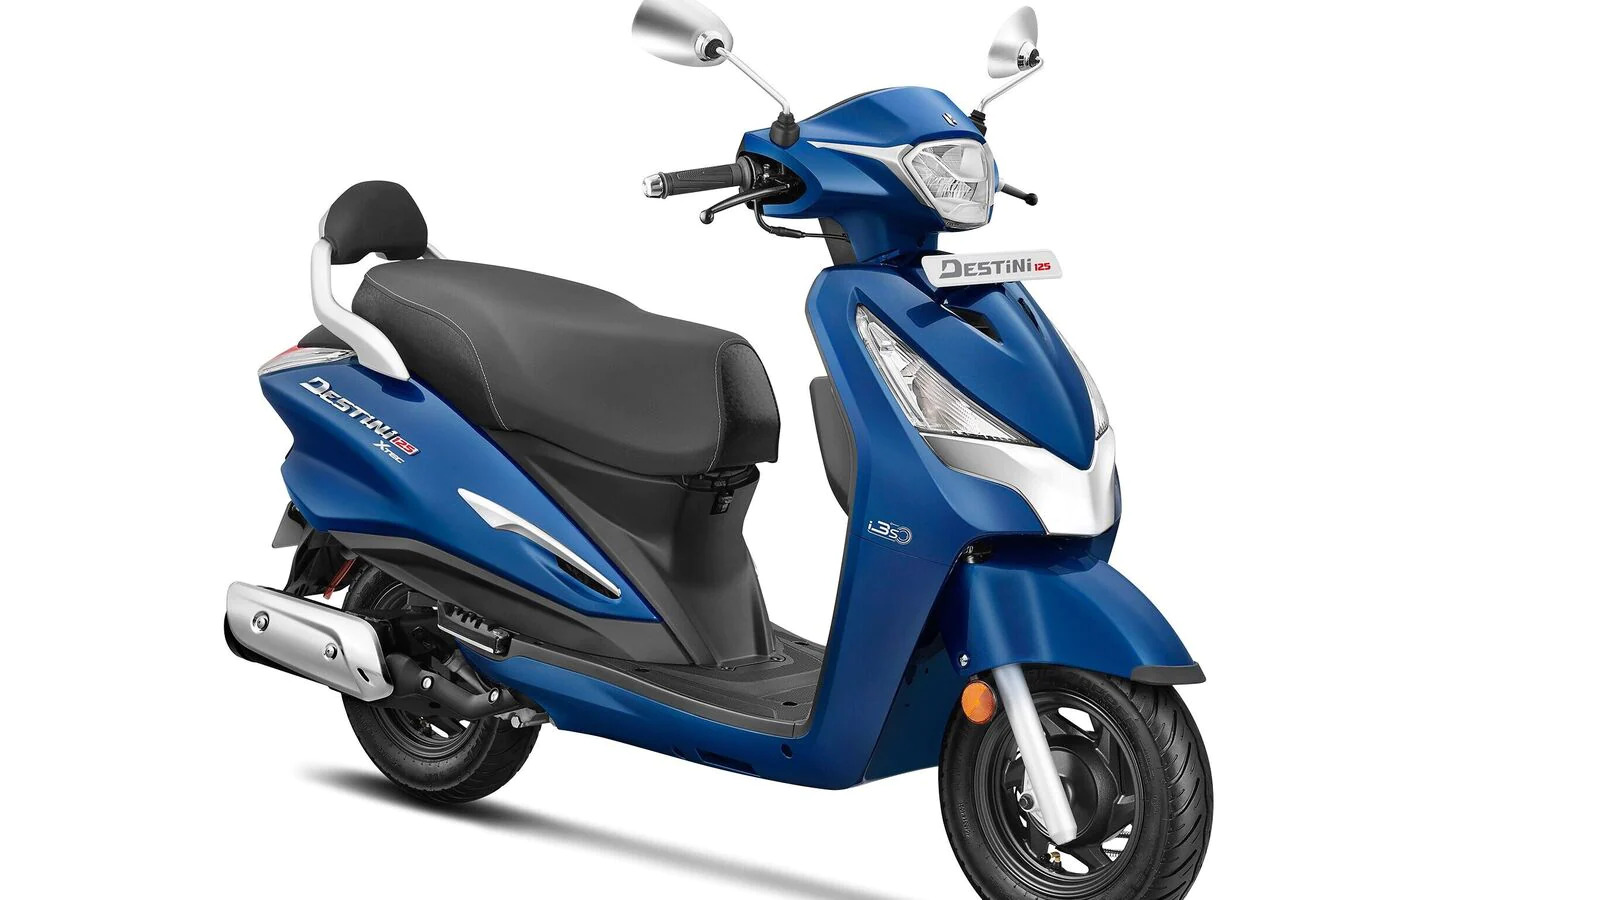 BEST SCOOTY FOR MEN,Best Mileage Scooters in India,Best Mileage Scooters in India in 2022,Most Fuel Efficient Scooters,best mileage scooty,best mileage scooty in India,best mileage scooty in India 2022,Best Mileage Scooters,most fuel-efficient 110cc scooters,Best 110cc mileage scooters in India,125cc Best Mileage Scooters In India,List Of Best Mileage Scooters In India